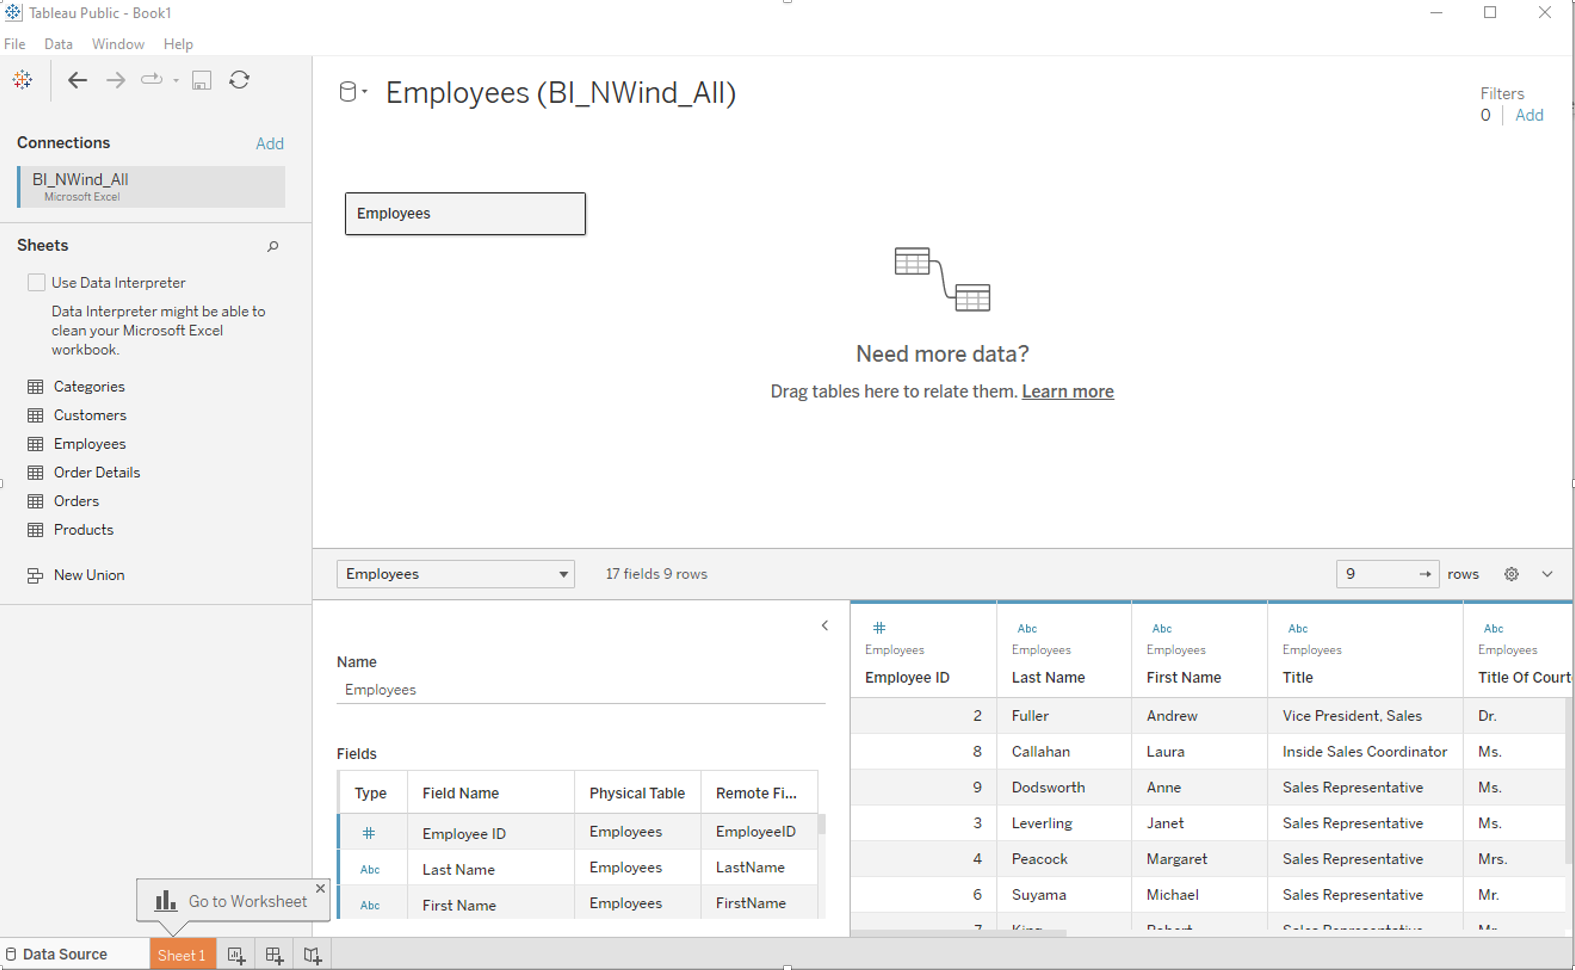 Screenshot showing the data source connection view in Tableau.